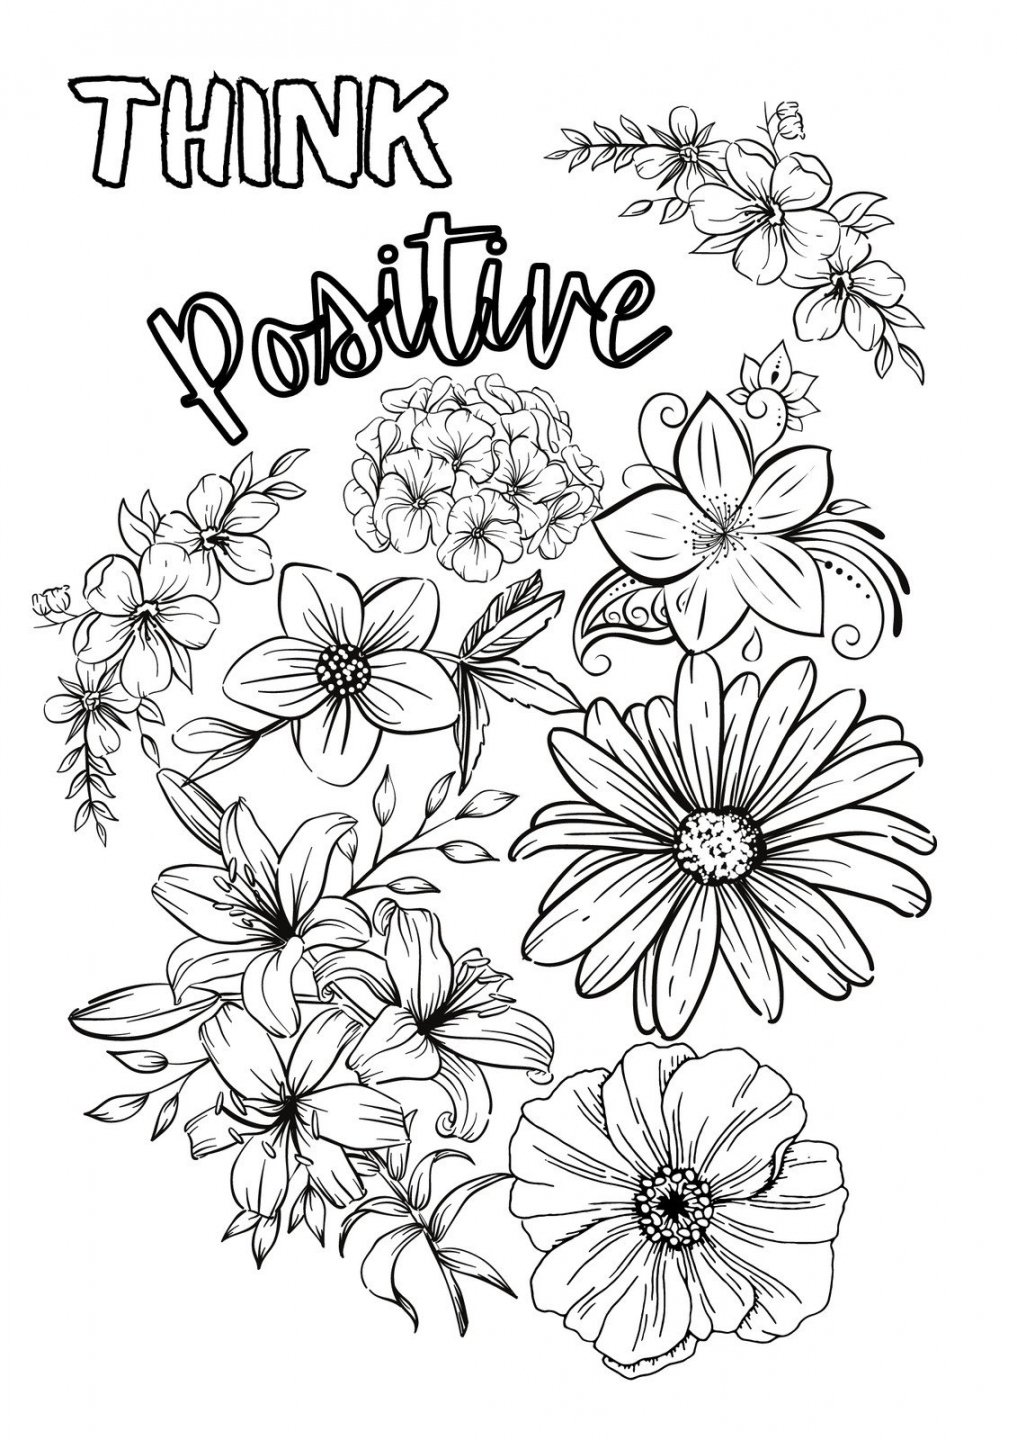 Free Printable Coloring Sheets - Printable - Free printable coloring page templates to customize  Canva